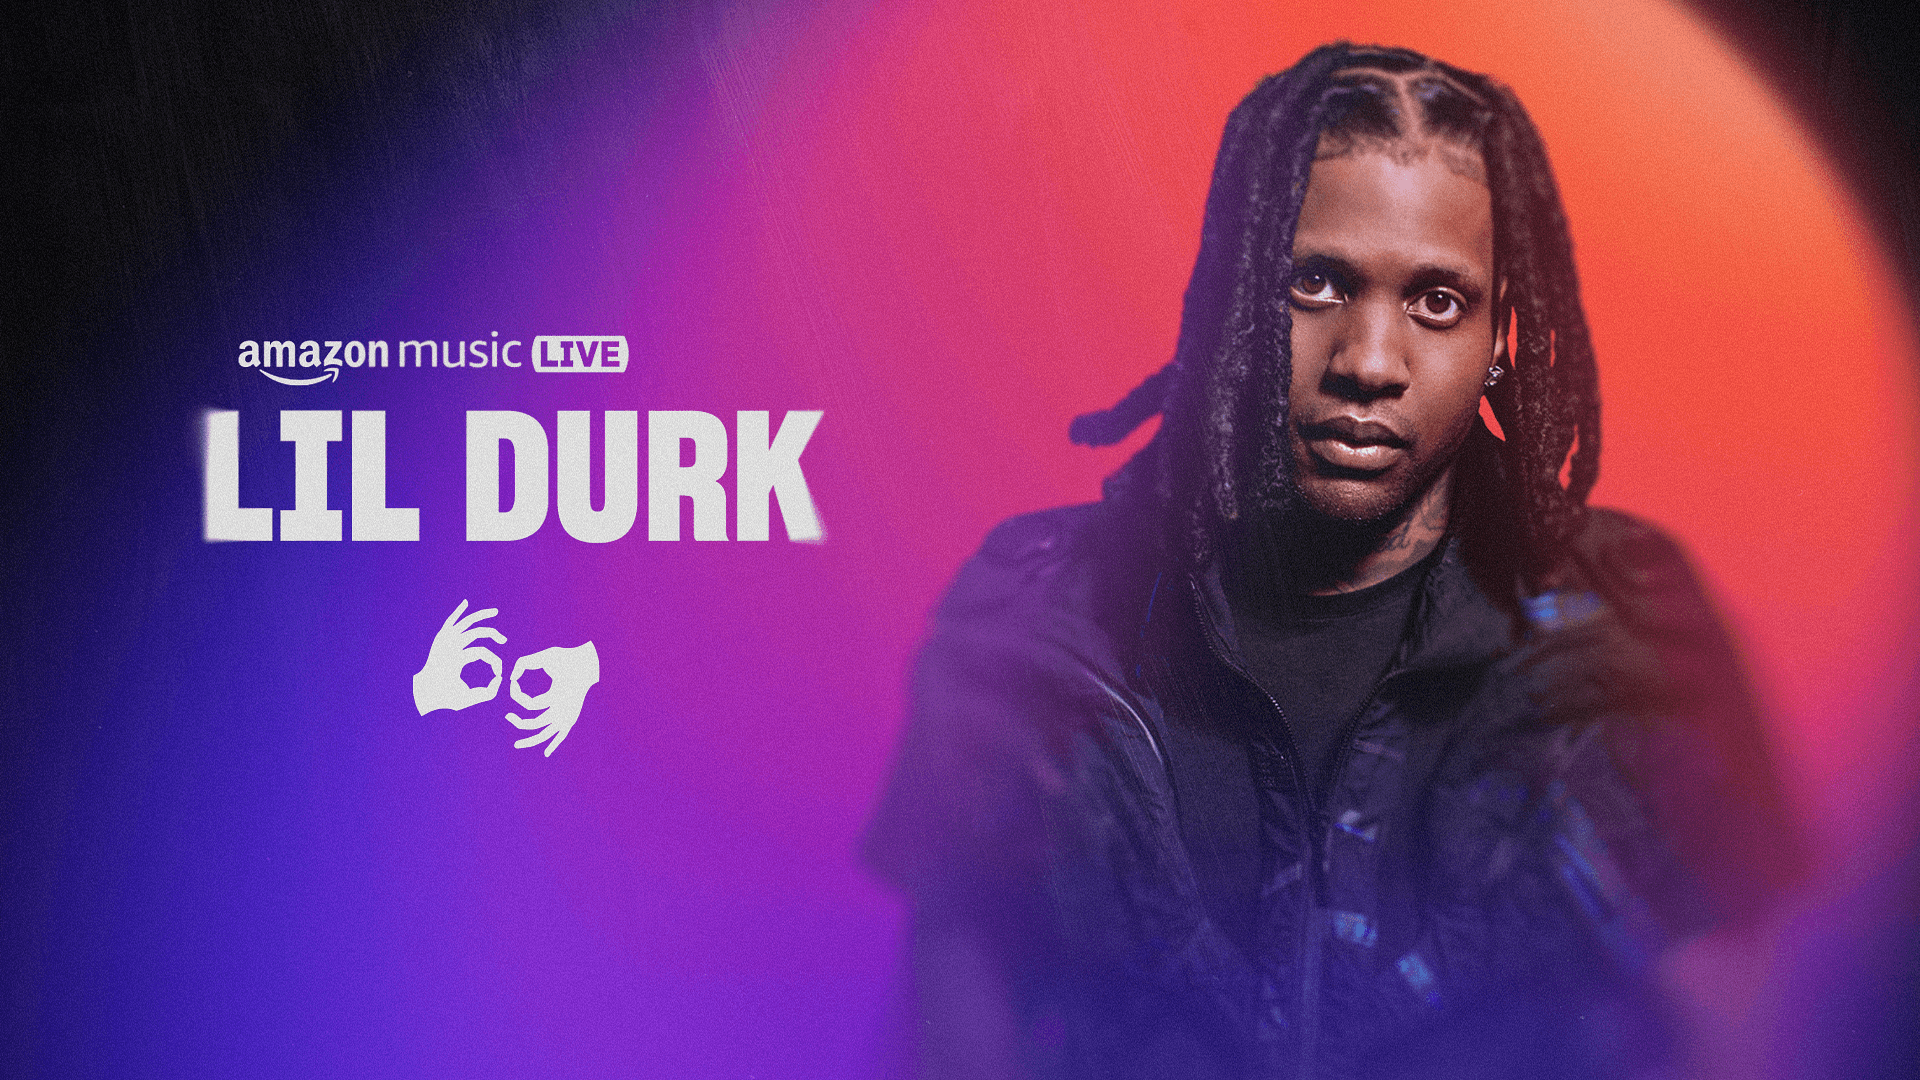 [ASL Version] Amazon Music Live with Lil Durk